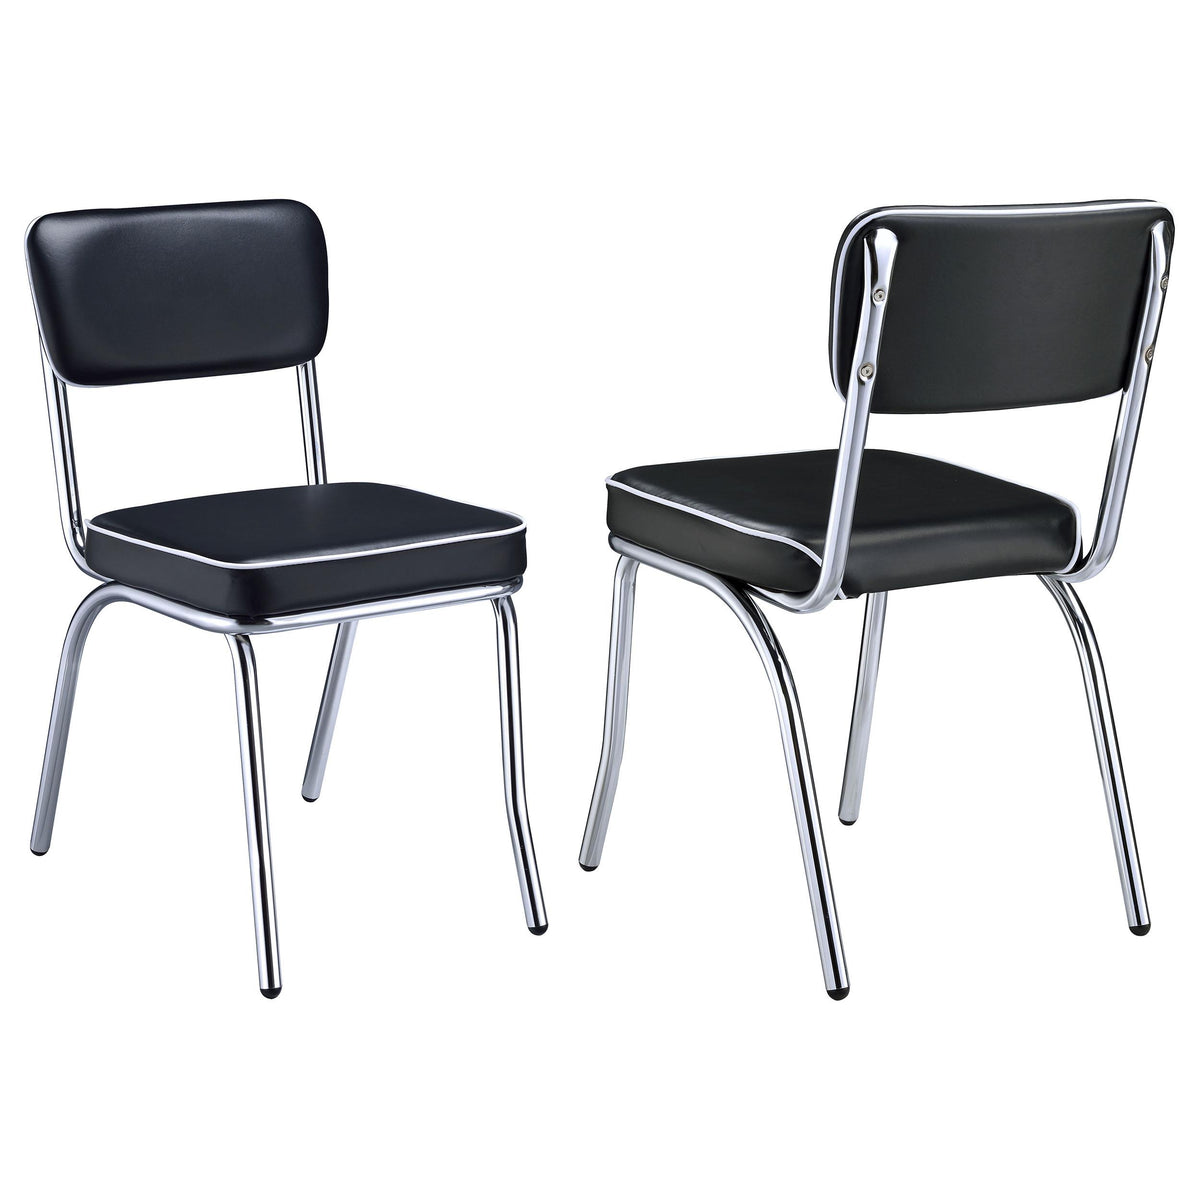 Retro Open Back Side Chairs Black and Chrome (Set of 2) Retro Open Back Side Chairs Black and Chrome (Set of 2) Half Price Furniture